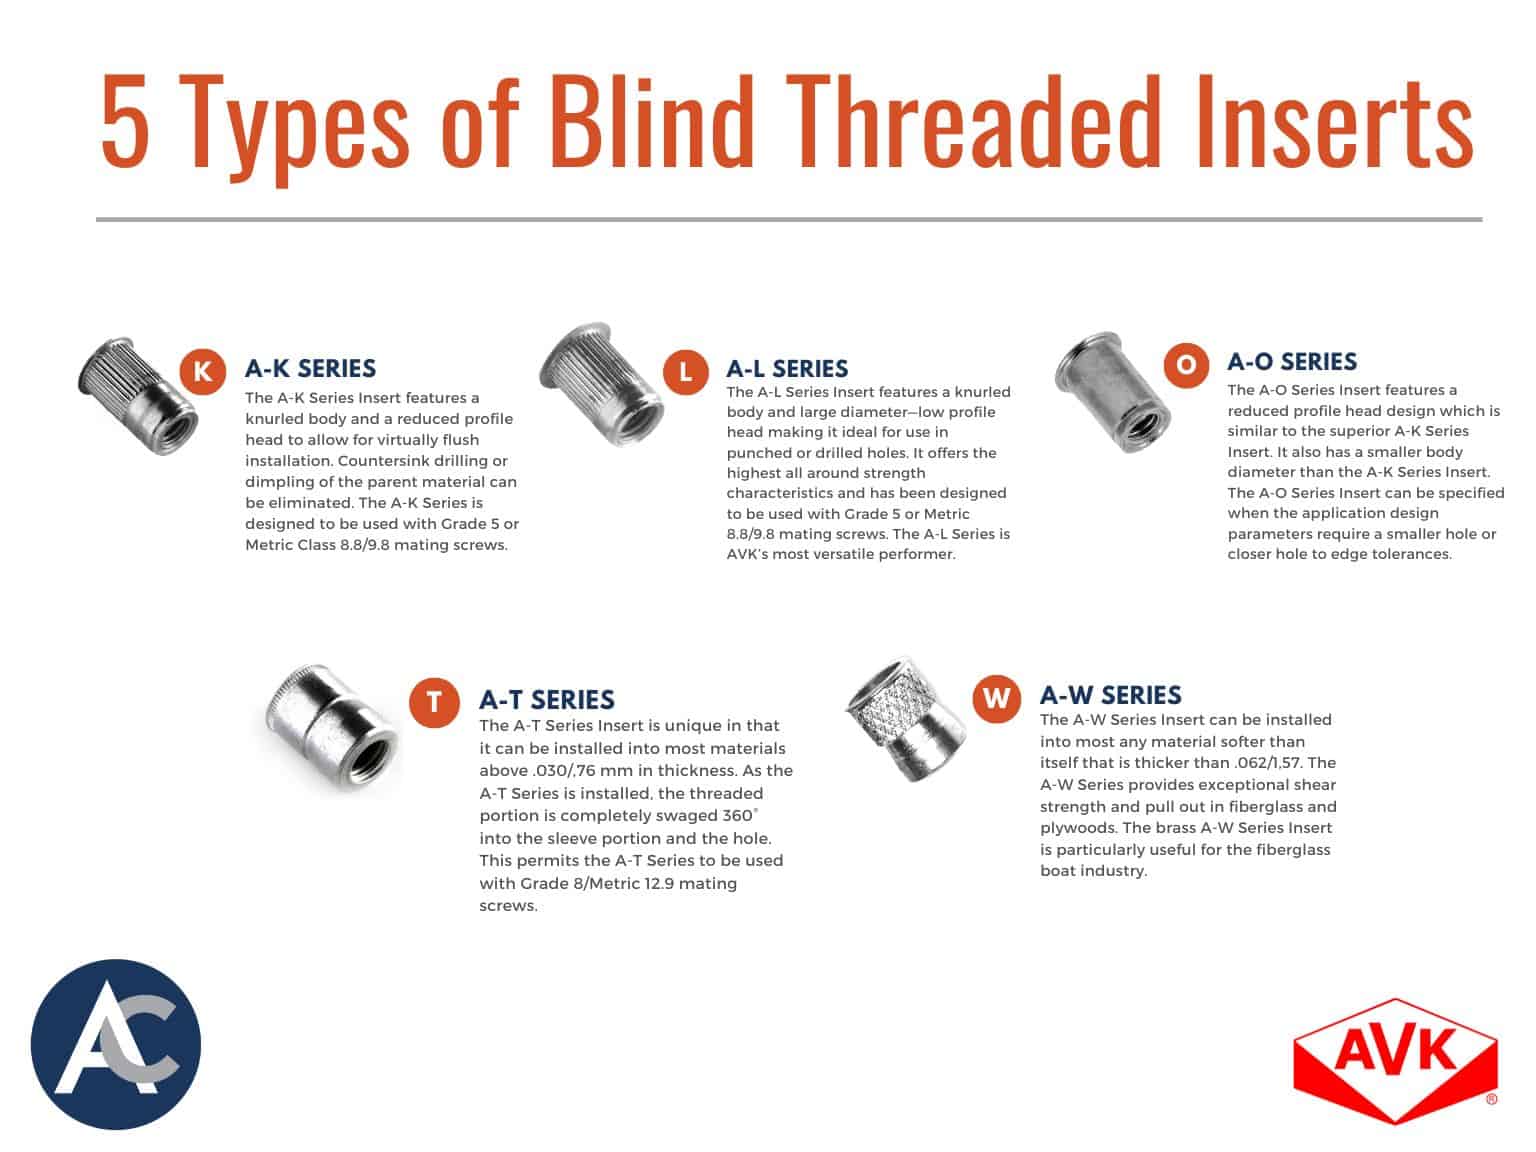 How to Choose the Right Threaded Insert